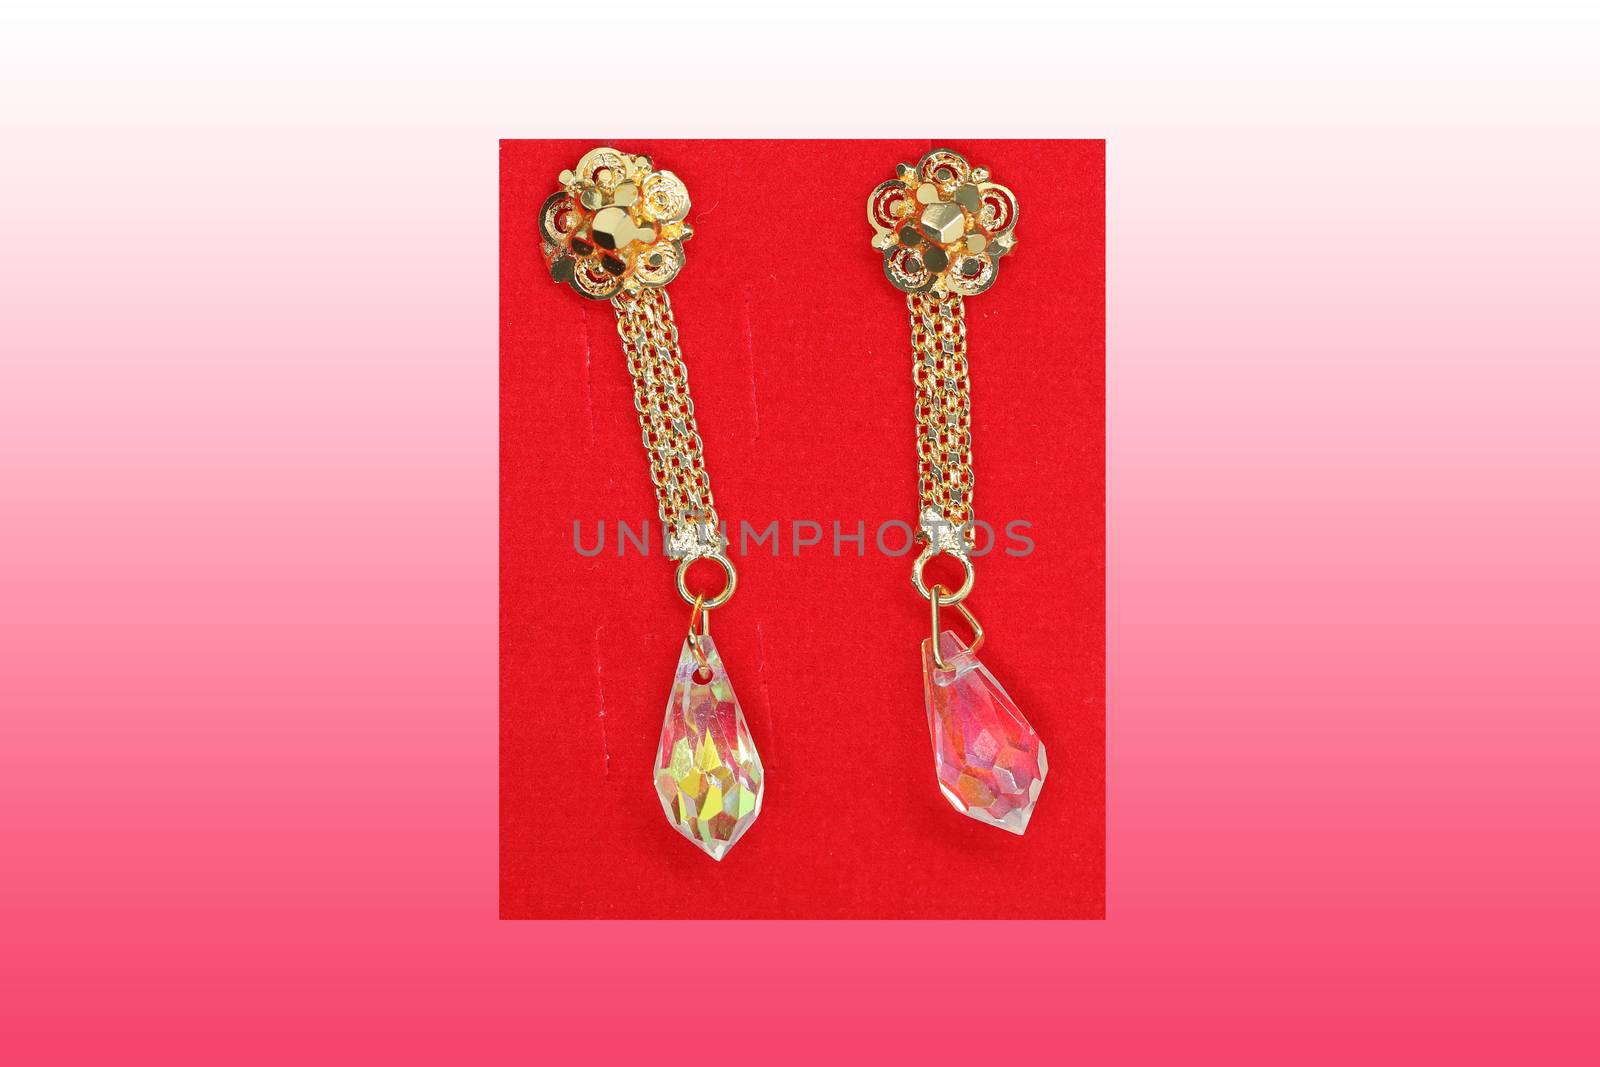 A pair of gold earrings in demand by 9500102400